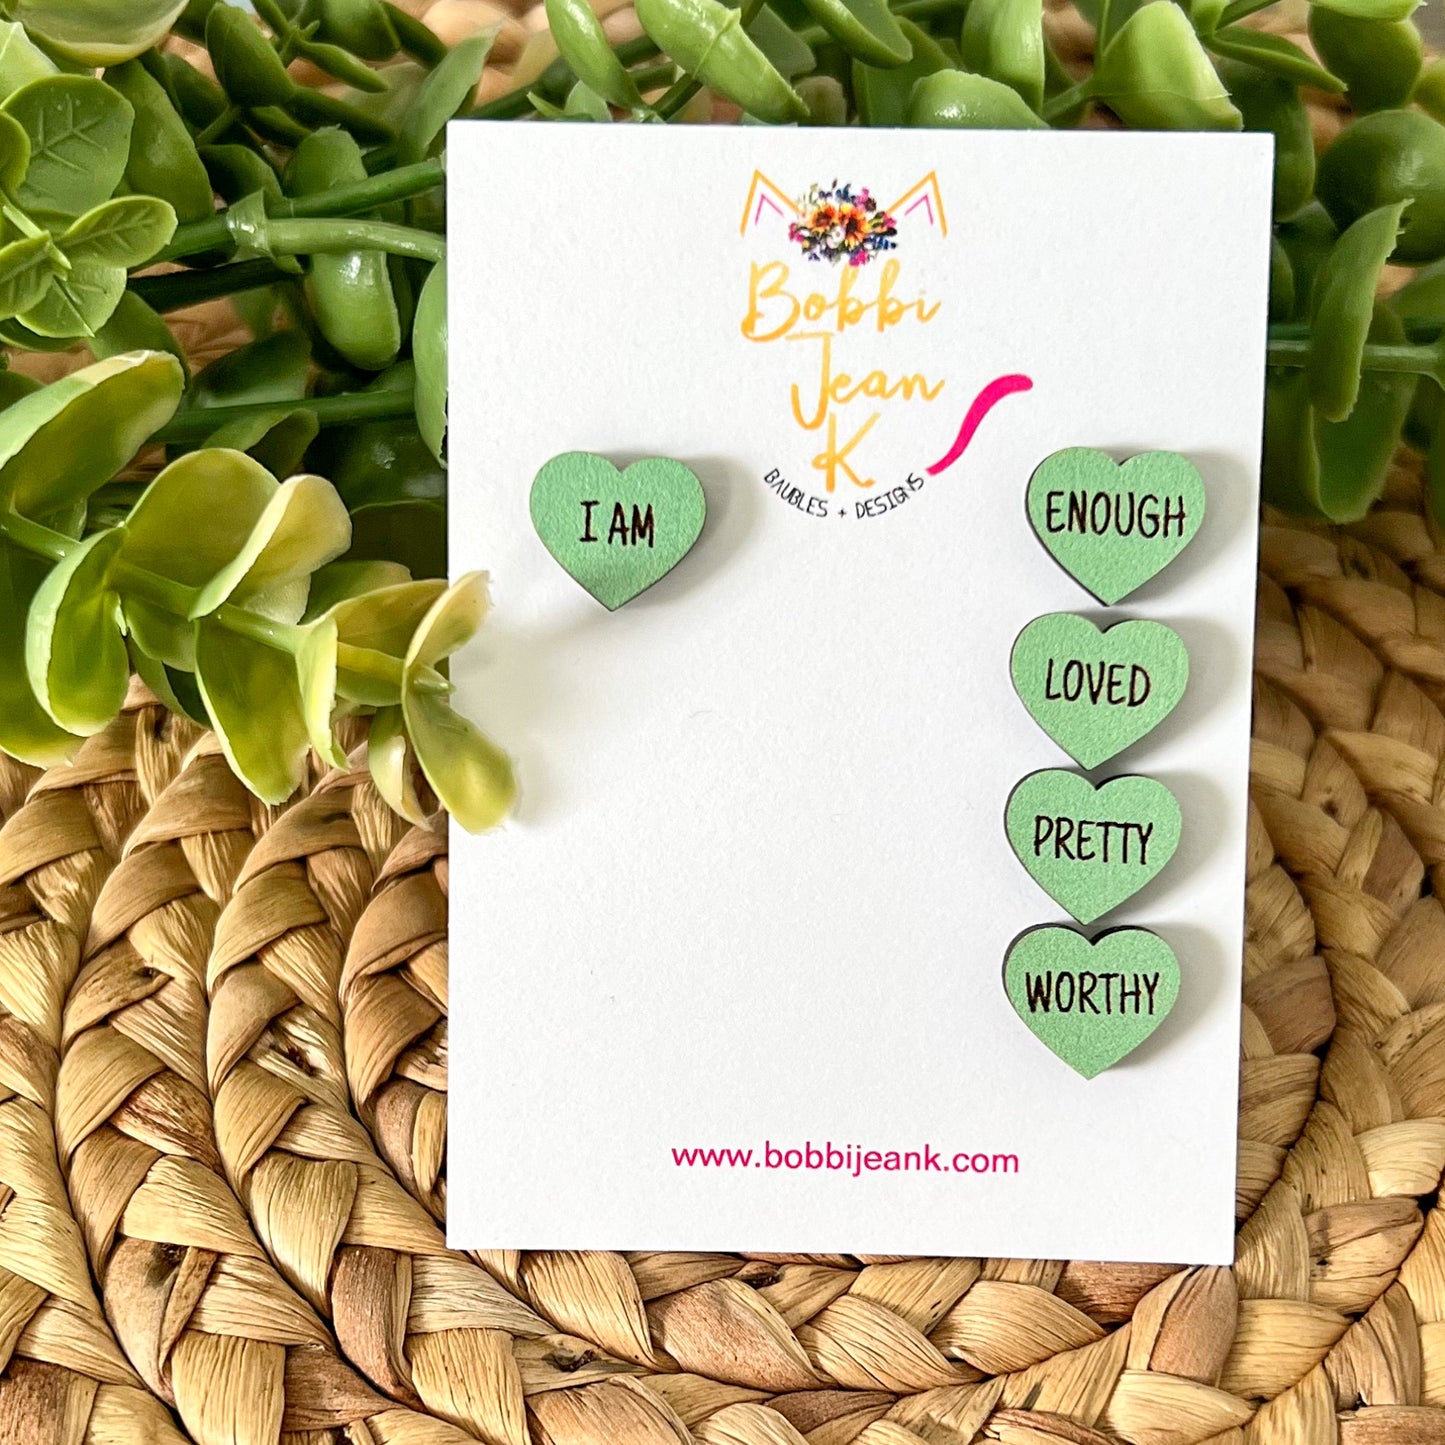 SALE: Light Green Wood Affirmation Heart Studs: 4 Pairs in One Set - ONLY ONE LEFT